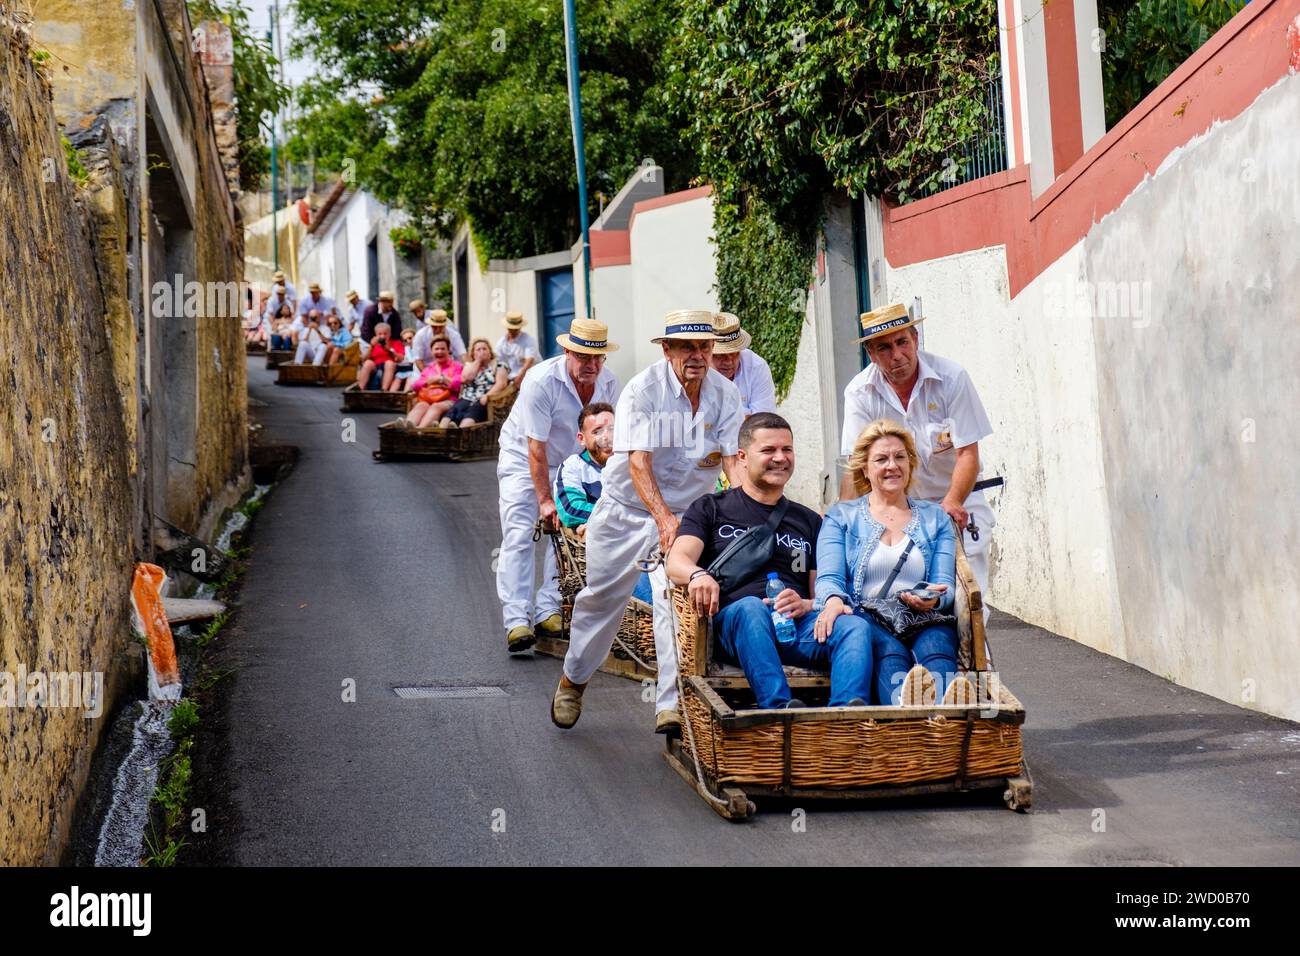 Tourists pushed downhill by carreiros, carros de cesto, basket carts, Monte toboggan ride, wicker basket carts mounted on skids, Funchal, Madeira Stock Photo